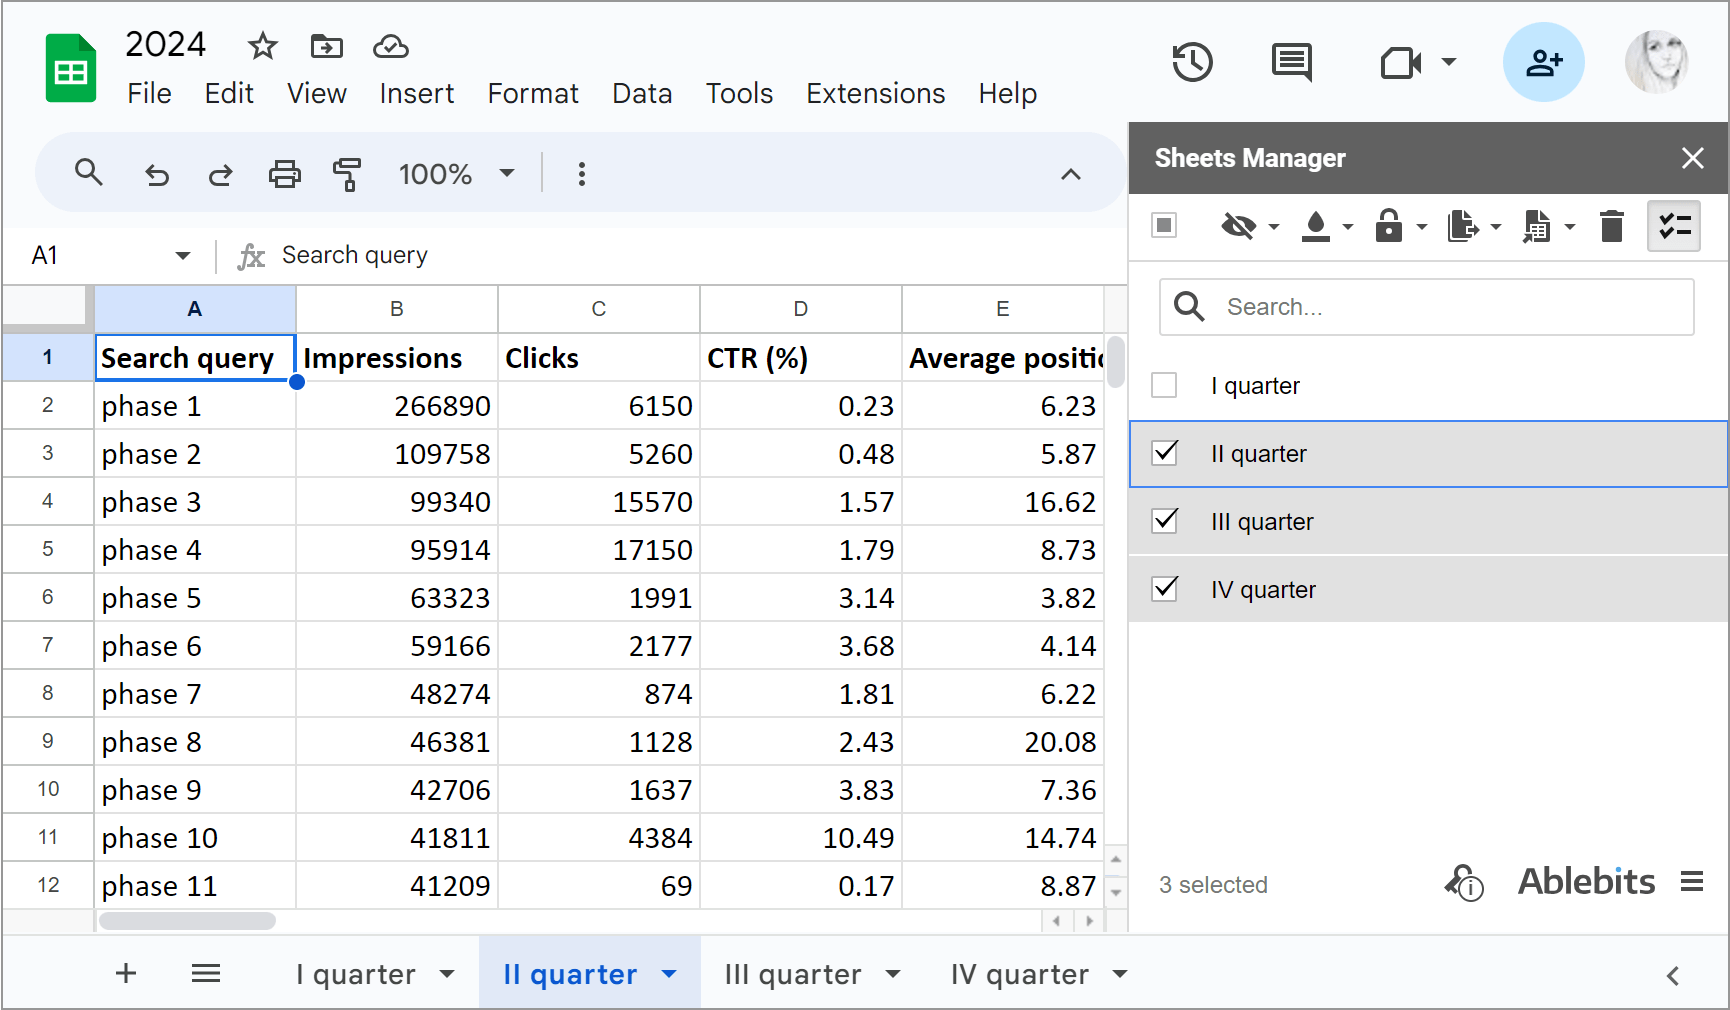 Select sheets to split directly in Sheets Manager.